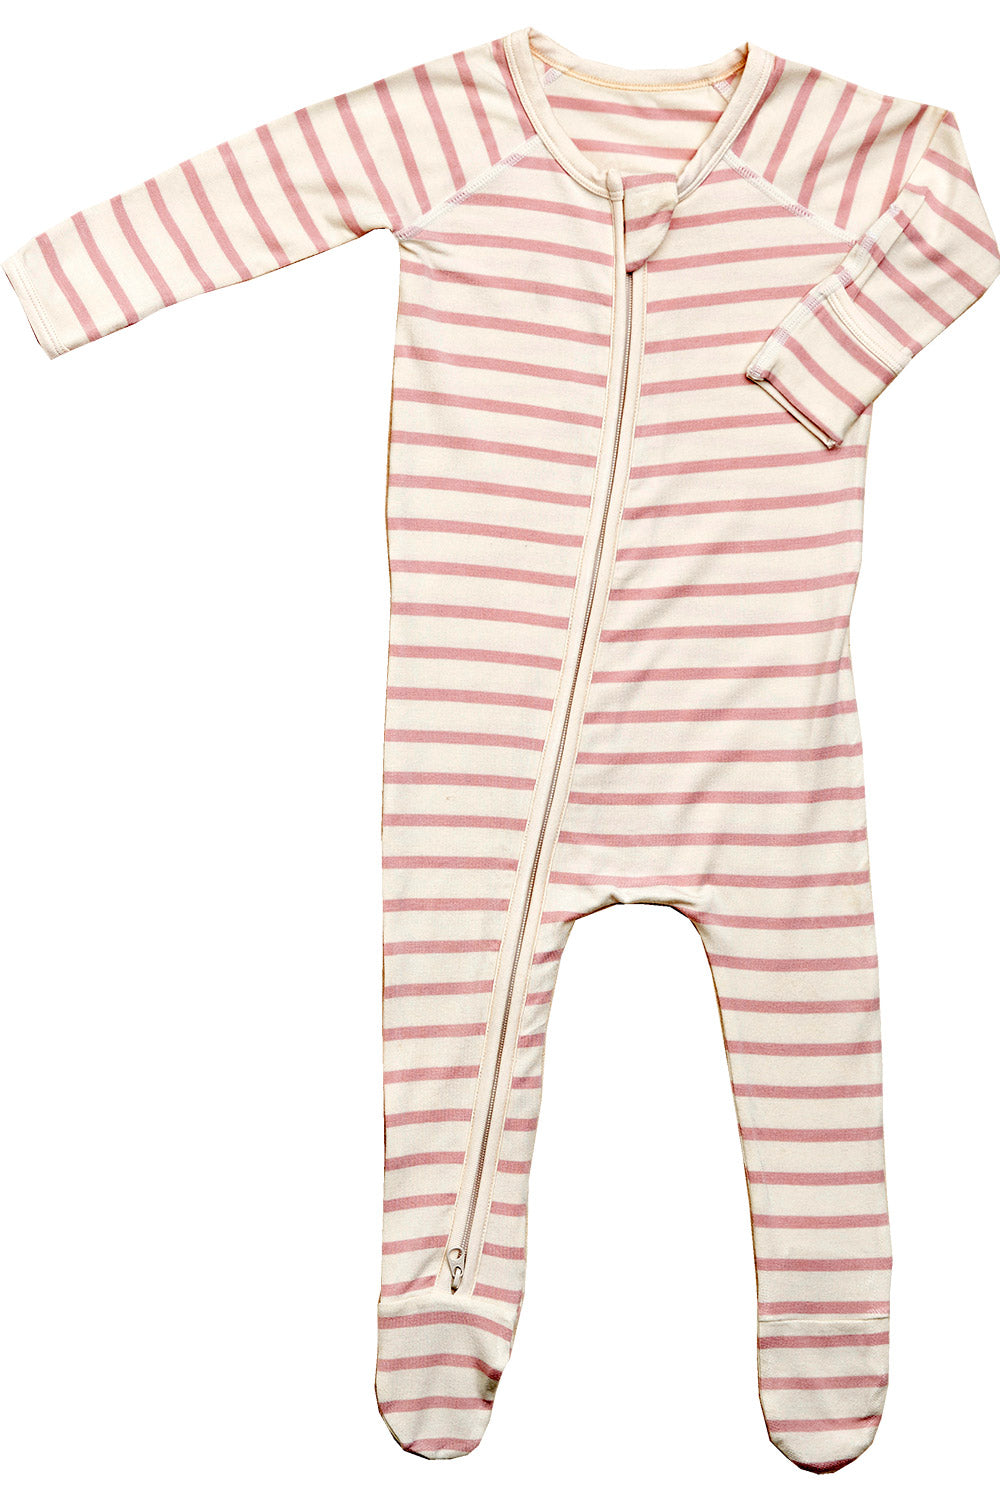 long sleeve baby suit